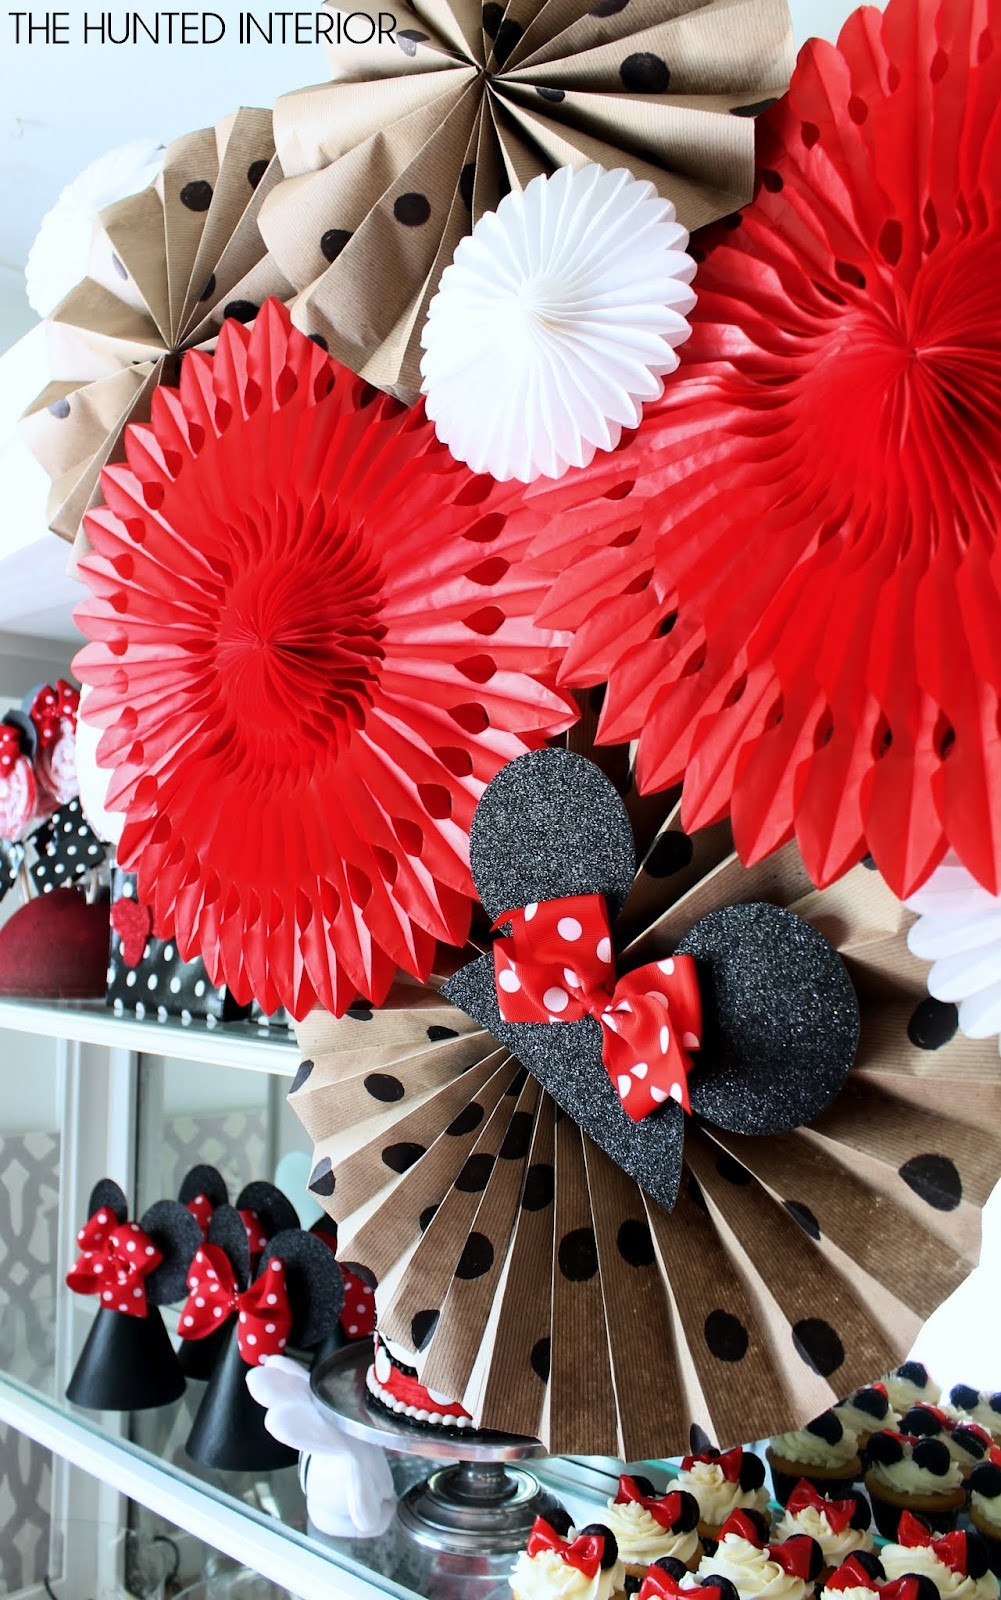 Minnie Mouse Birthday Party Decoration Ideas
 hunted interior Minnie Mouse Birthday Party